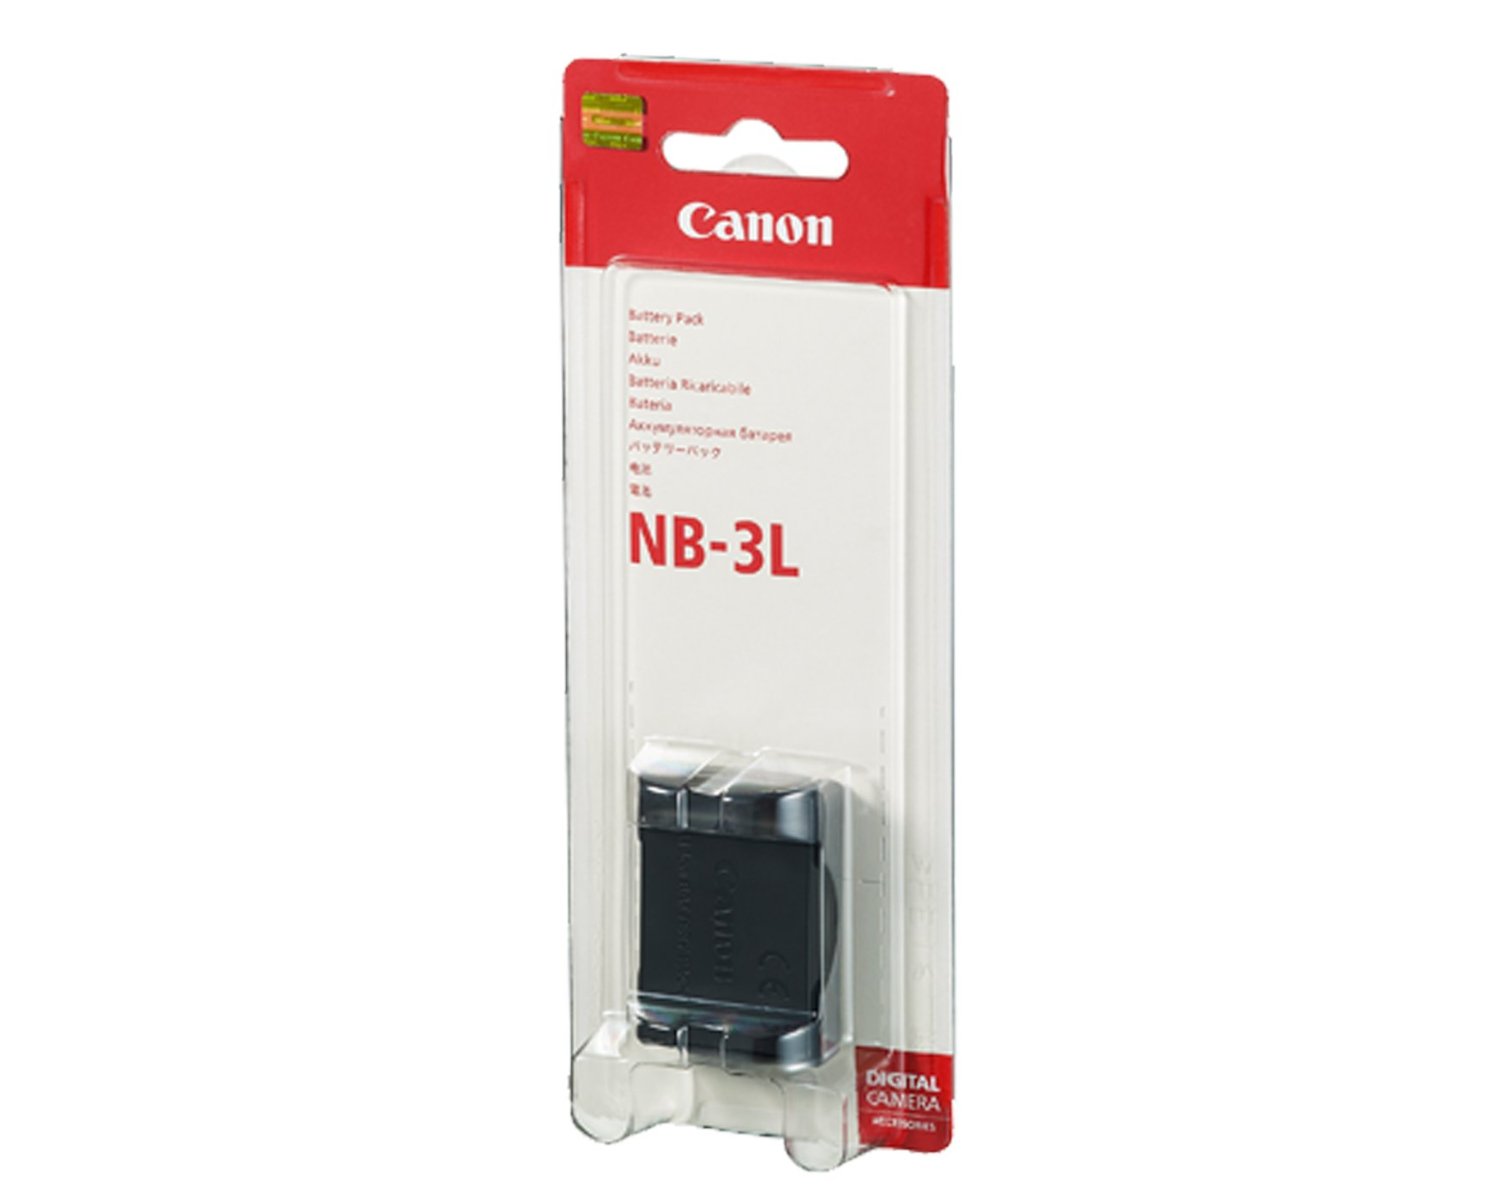 Canon Battery Pack NB-3L - Click Image to Close